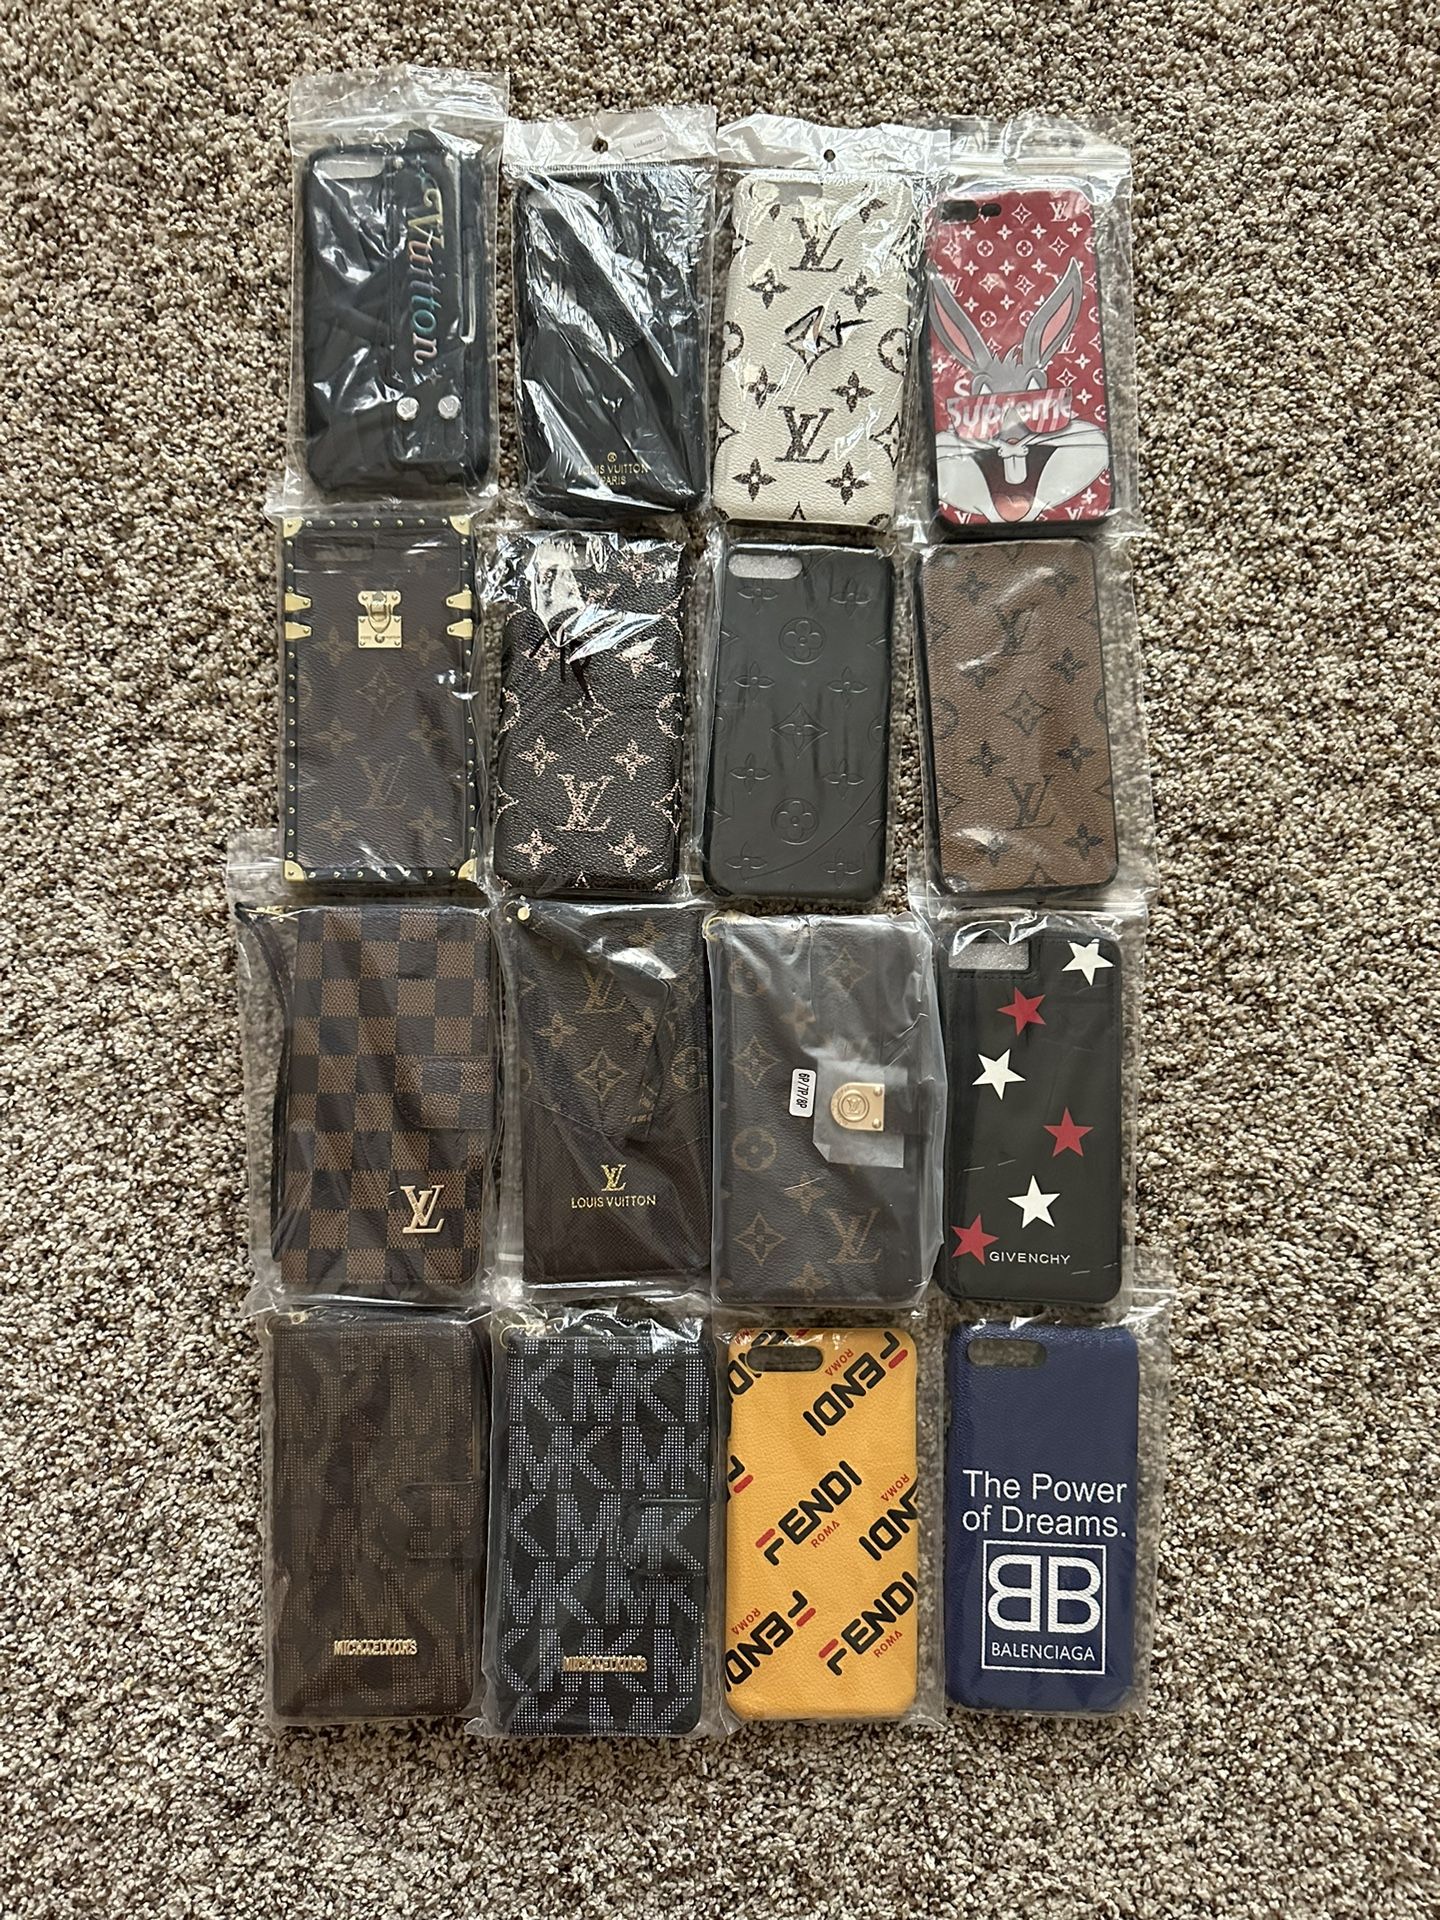 iPhone 7/8Plus Cases $1.00 each 6 for $5.00